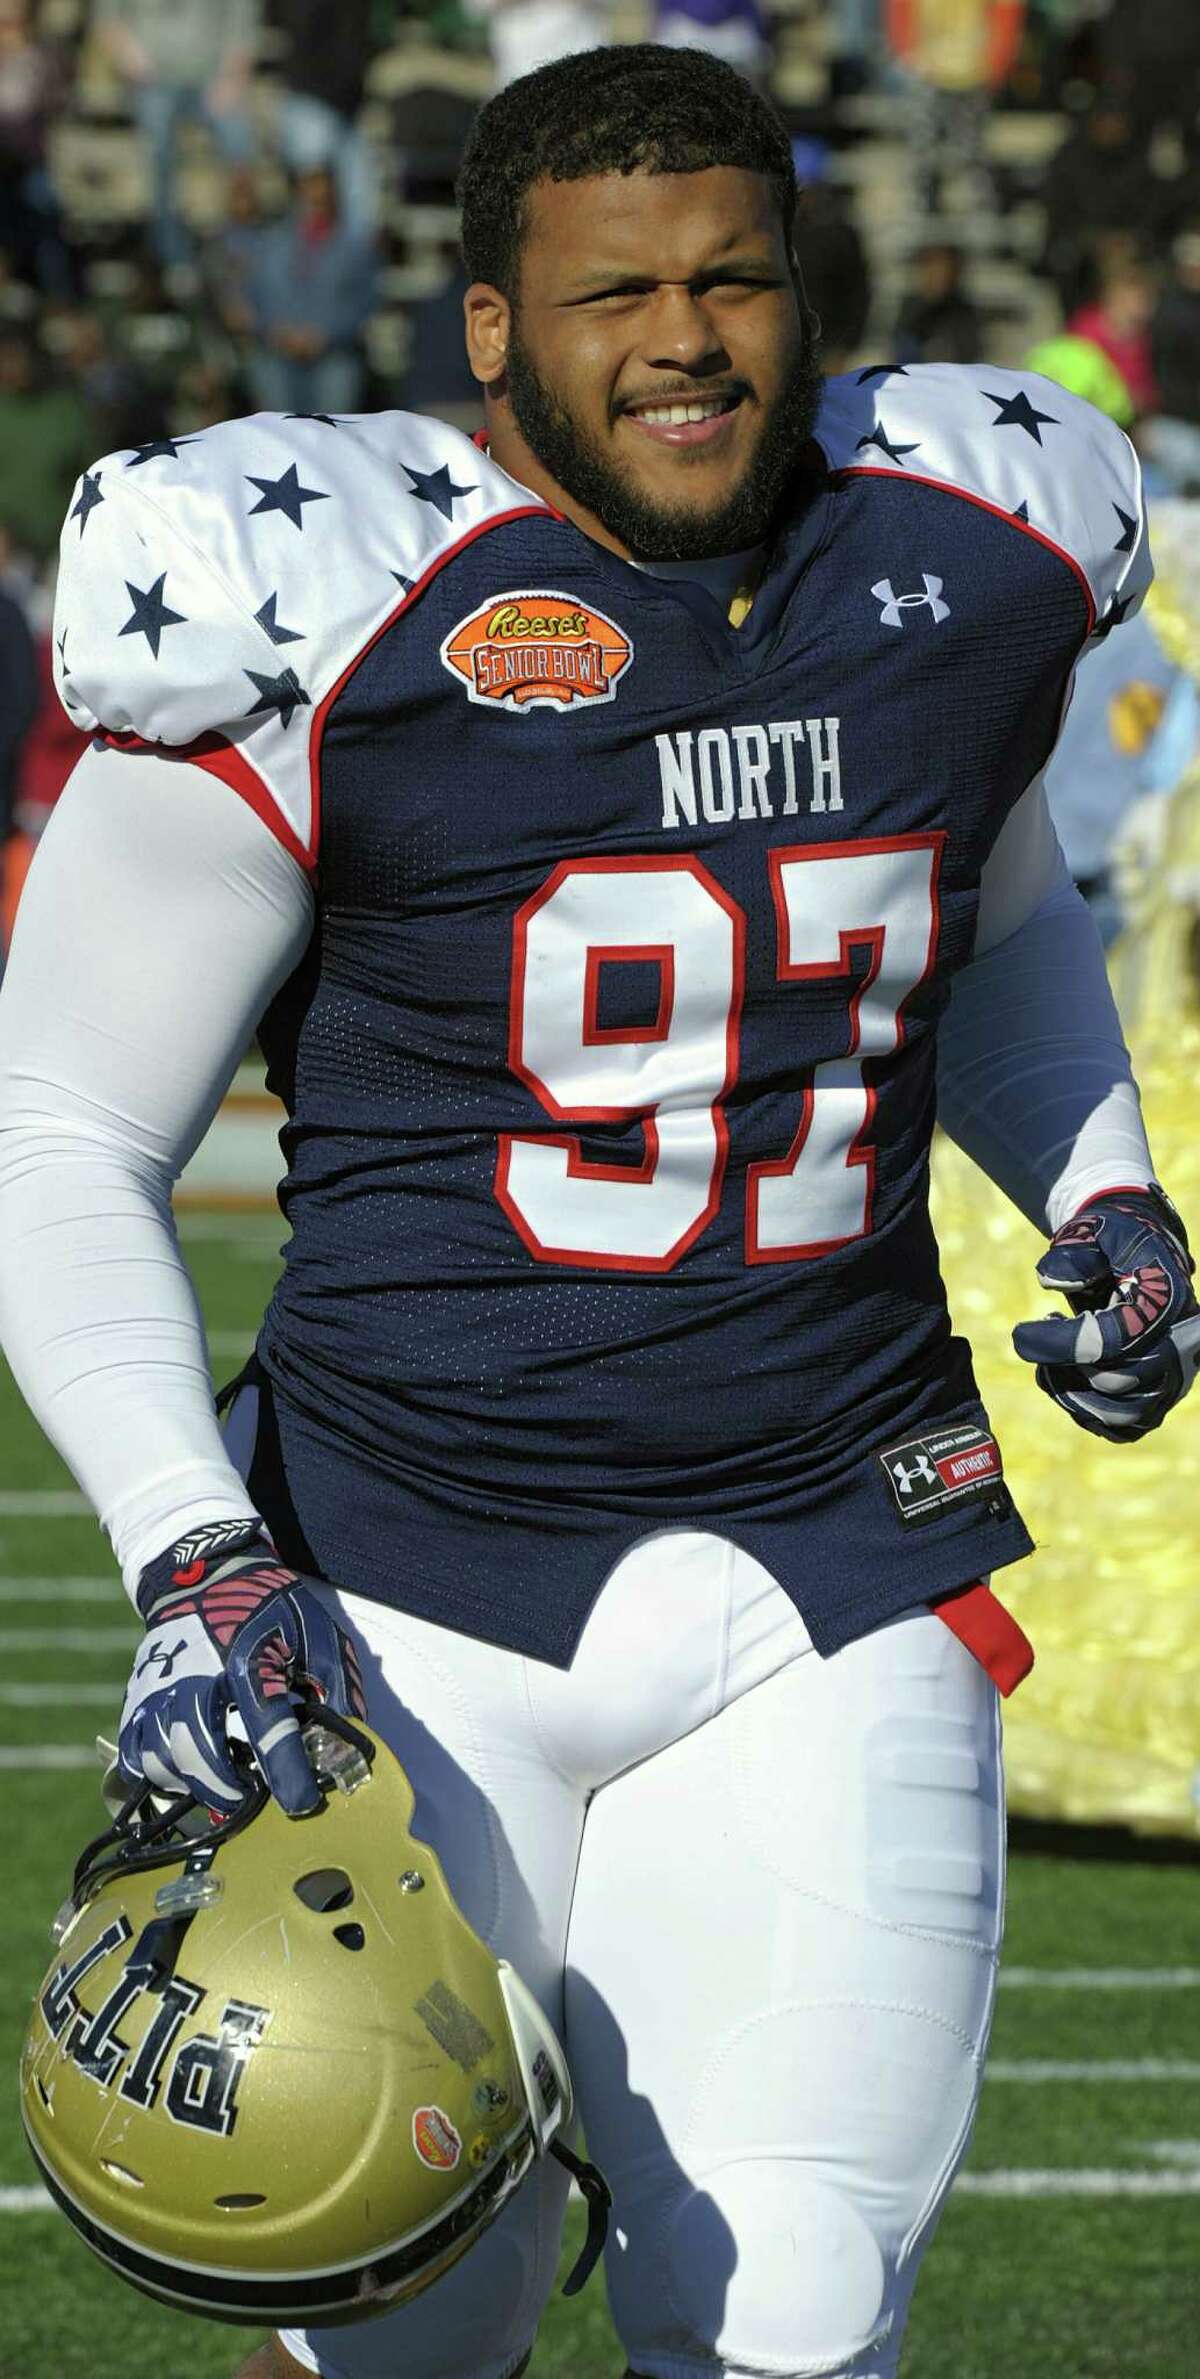 North defensive tackle Aaron Donald (97) of Pittsburgh runs on to the field before the Senior Bowl NCAA college football game on Saturday, Jan. 25, 2014, in Mobile, Ala. (AP Photo/G.M. Andrews)